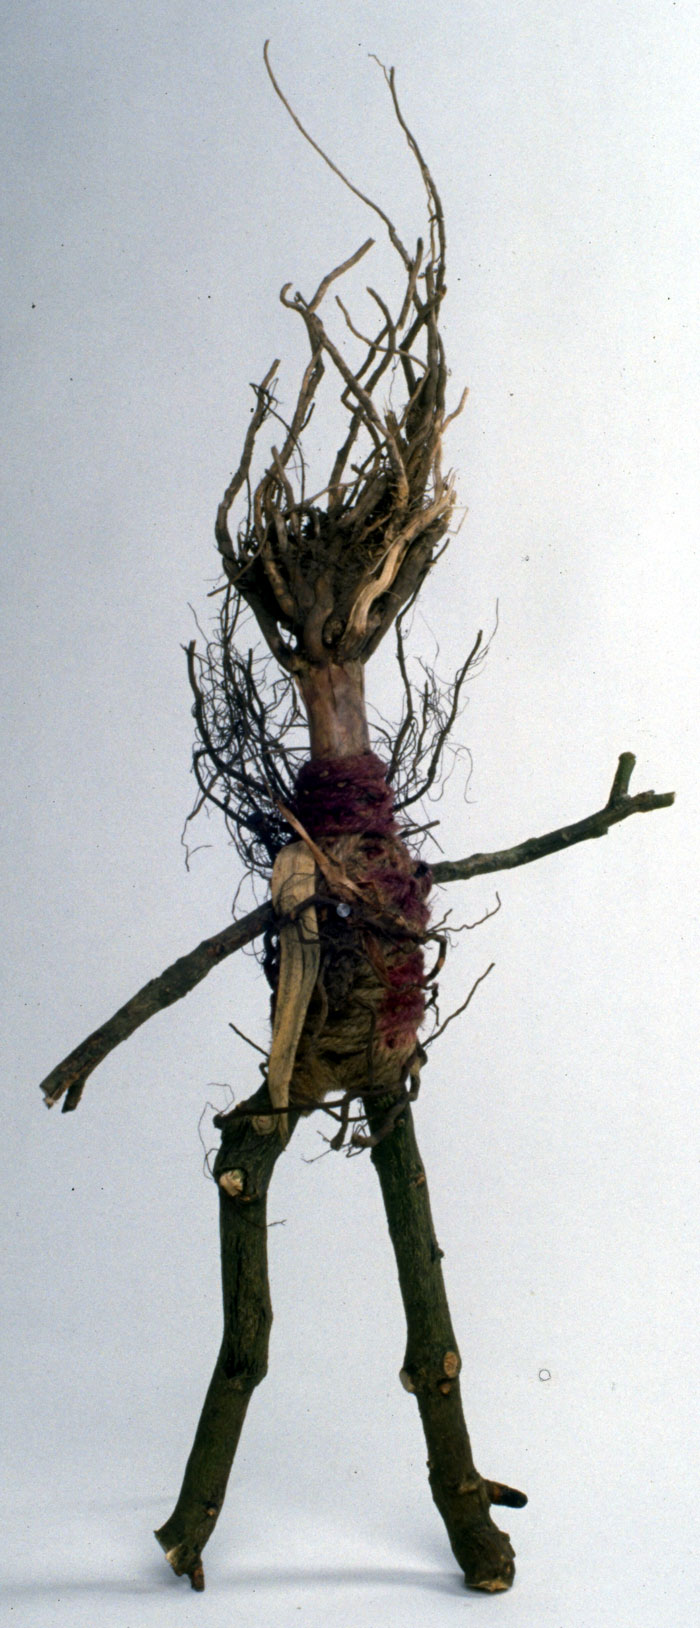 Root doll, 1997